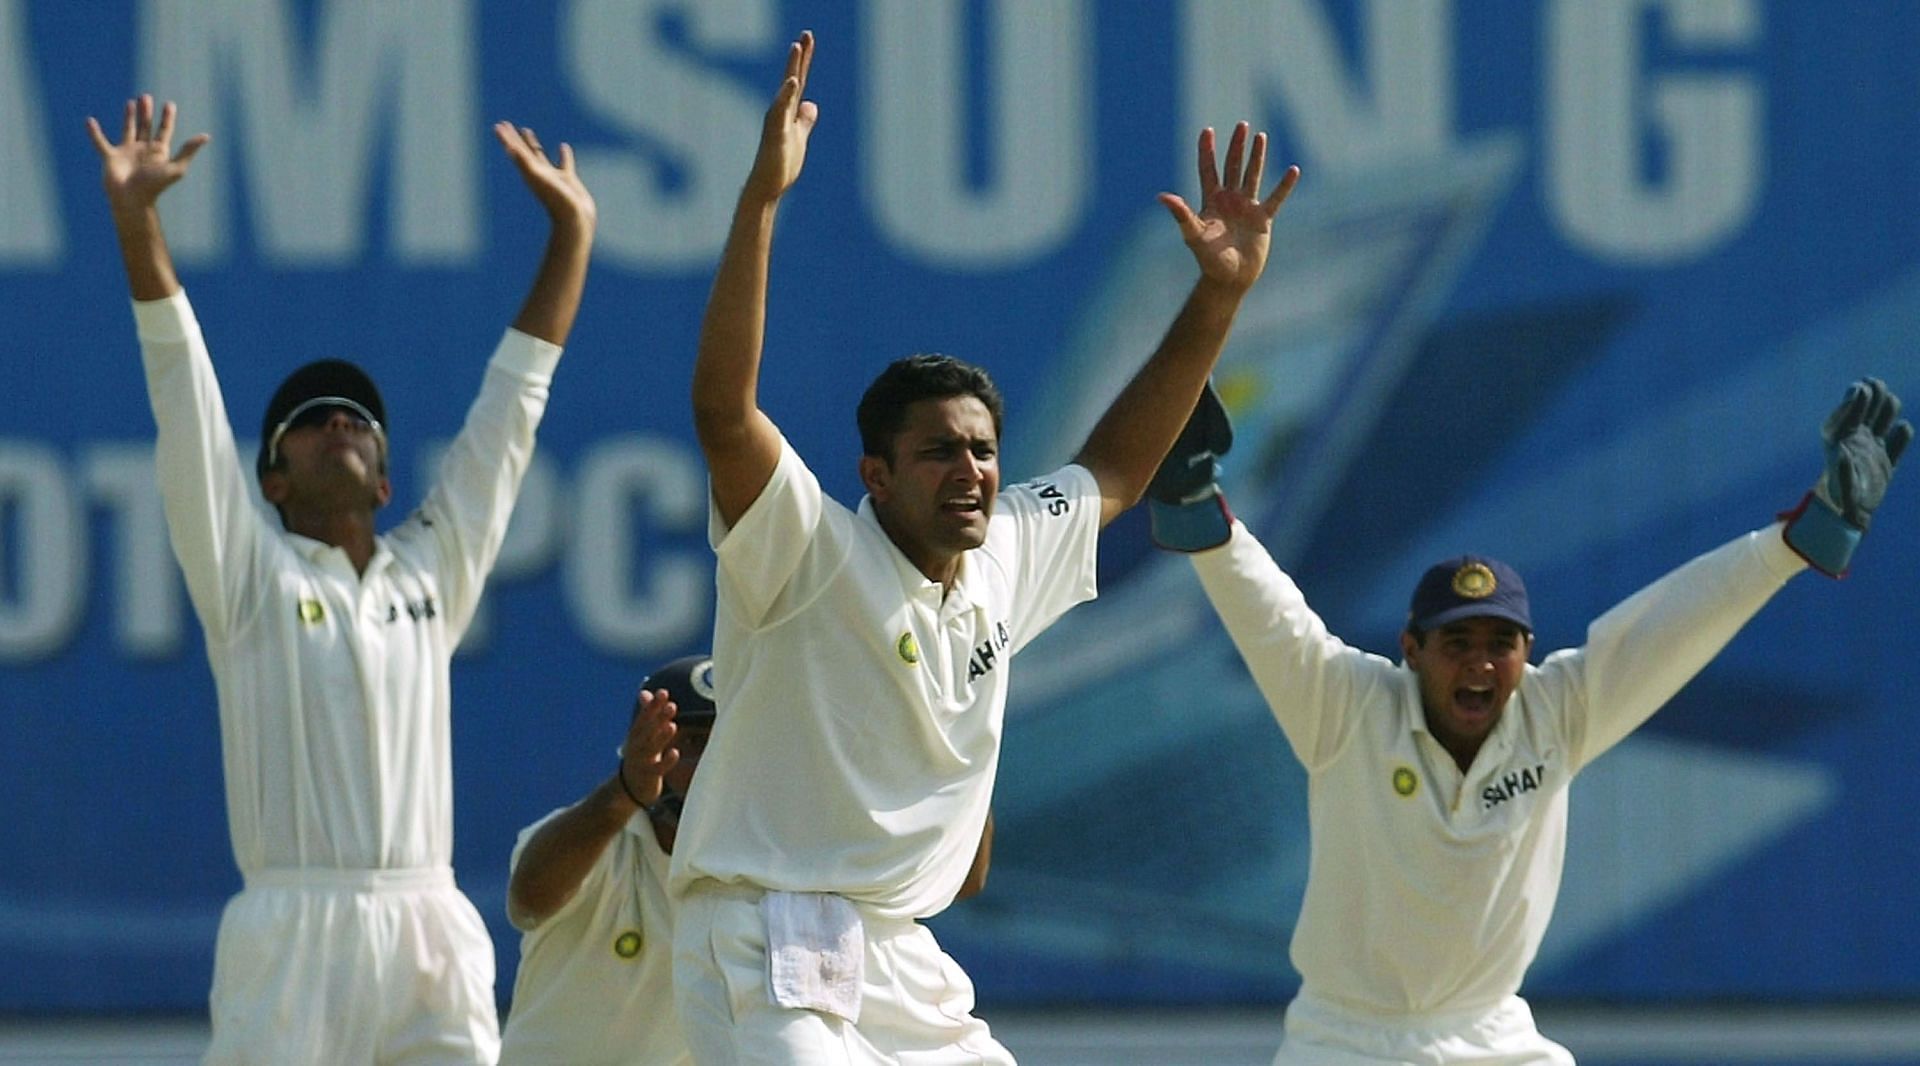 Former India leg-spinner Anil Kumble. Pic: Getty Images